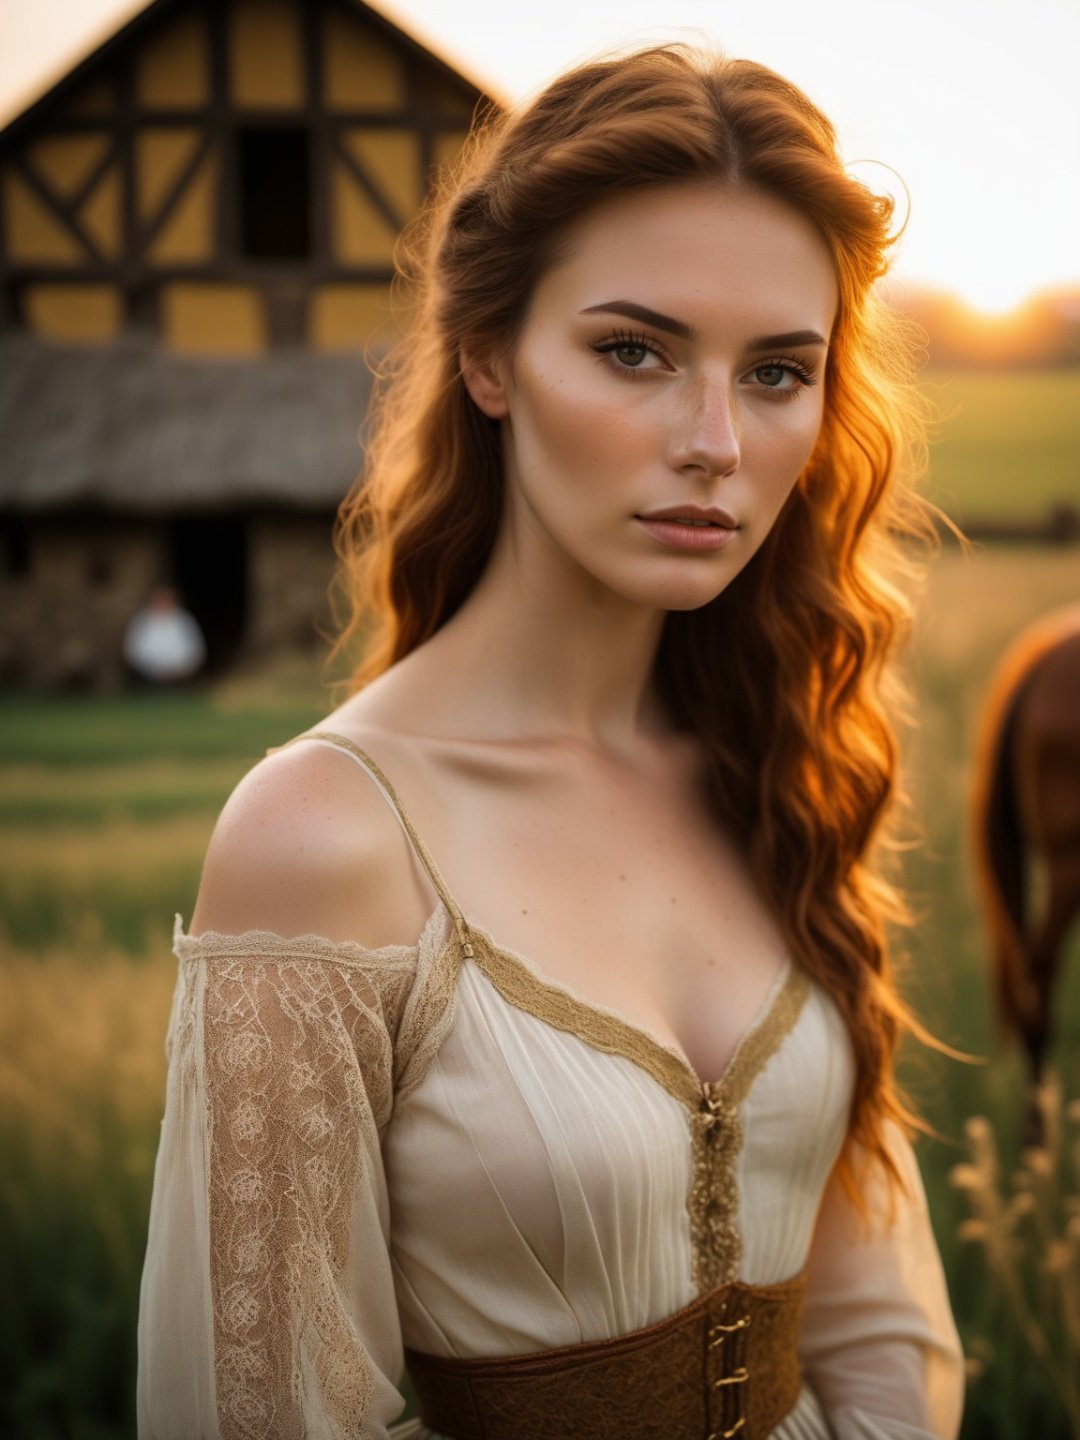 ((farm:1.5) photography), best quality, 1girl, (meadow teenager, as villager, freckles), big sagging breast, thigh gap ((farm:1.3) girl, sexy ((medieval:1.3) lingerie, exposing breast), (farm village, outdoors, golden hour:1.1), (light makeup, eyelashes, seductive gaze), aura, atmospheric lighting, cinematic composition, detailed face, (natural skin, skin pores, detailed skin), (intricate, vibrant, sharp focus, Fujifilm XT3:1.1576)